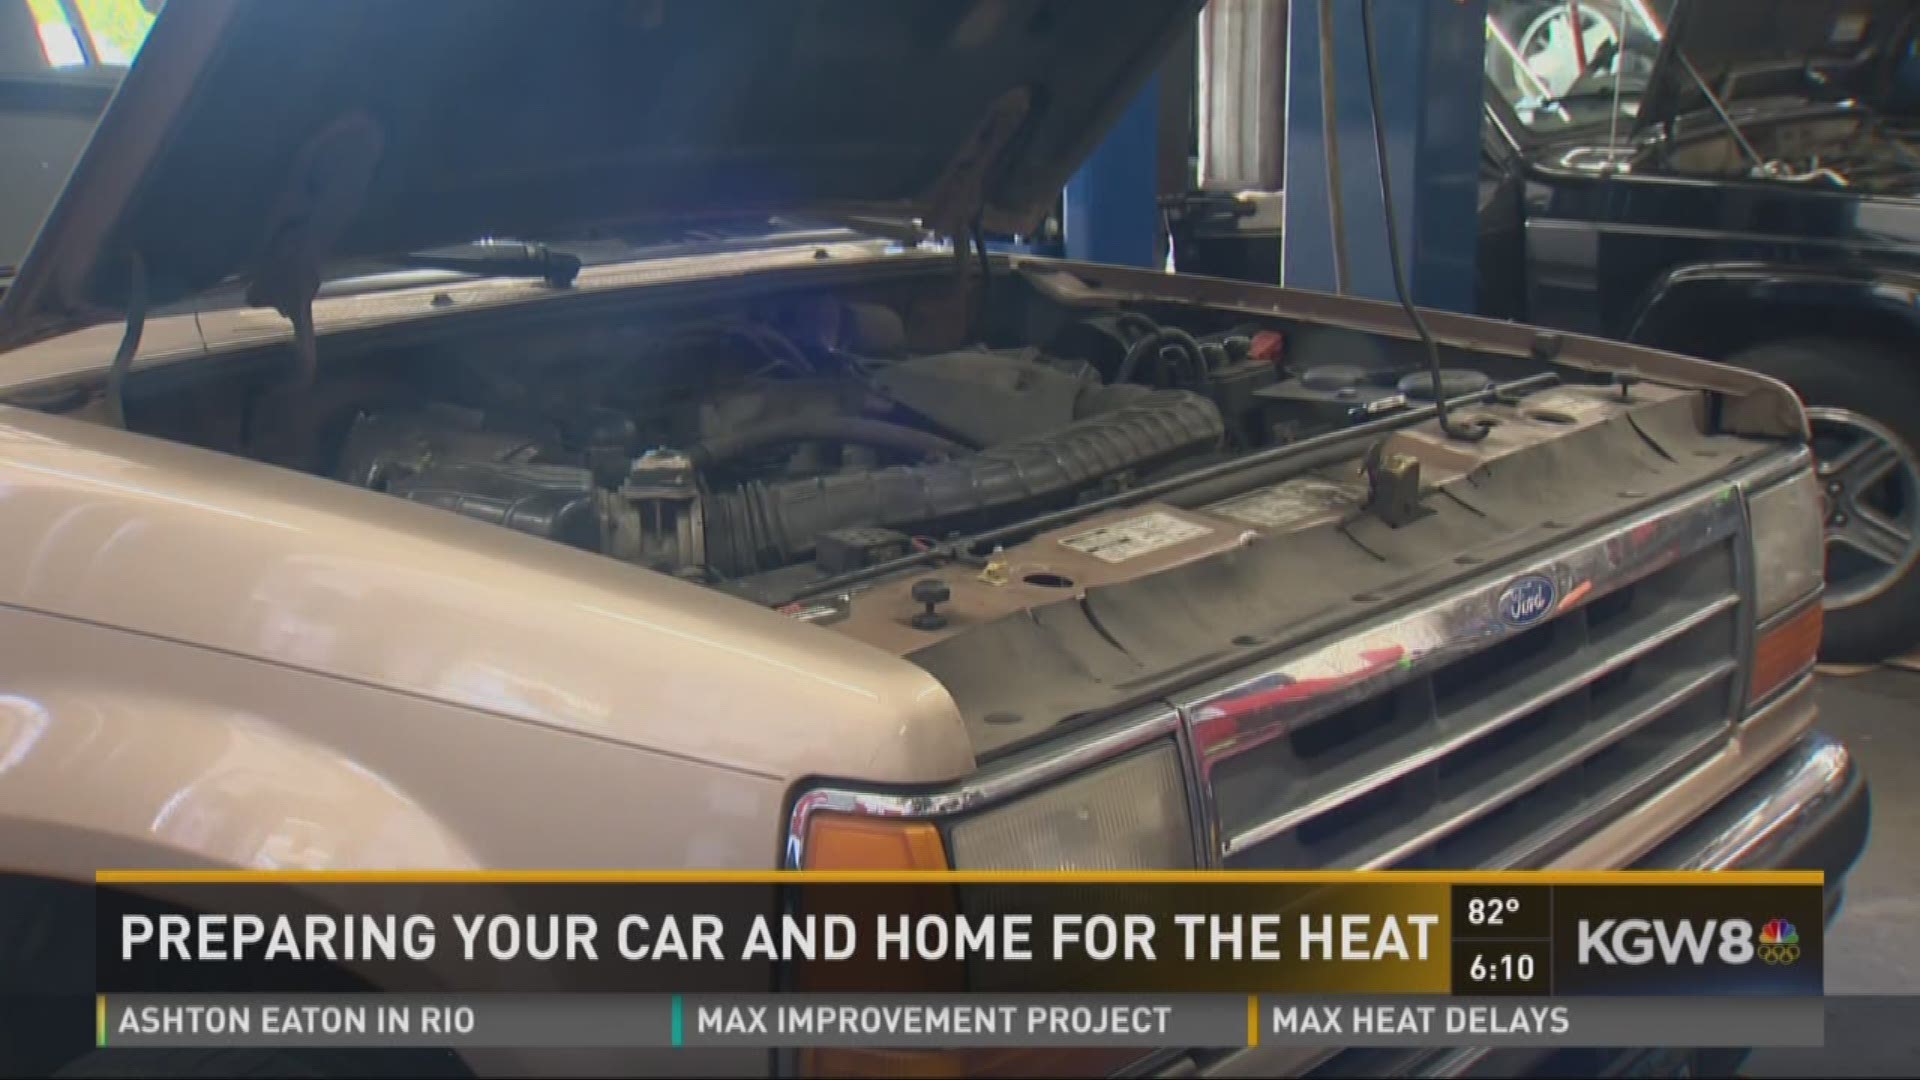 Preparing your car and home for the heat